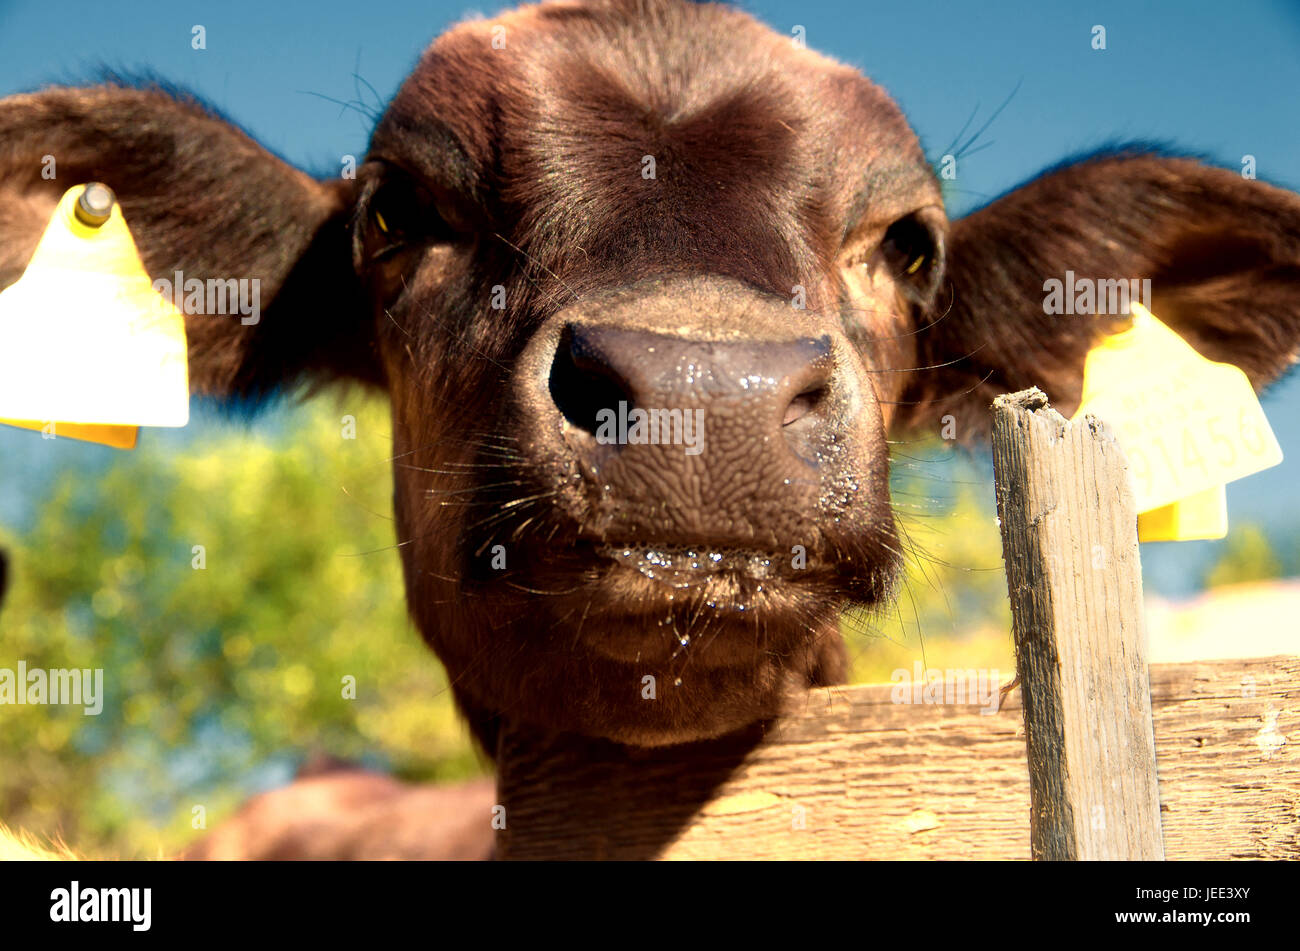 Livestock farming. Young cow in a cowshed. Calf in a barn. Stock Photo